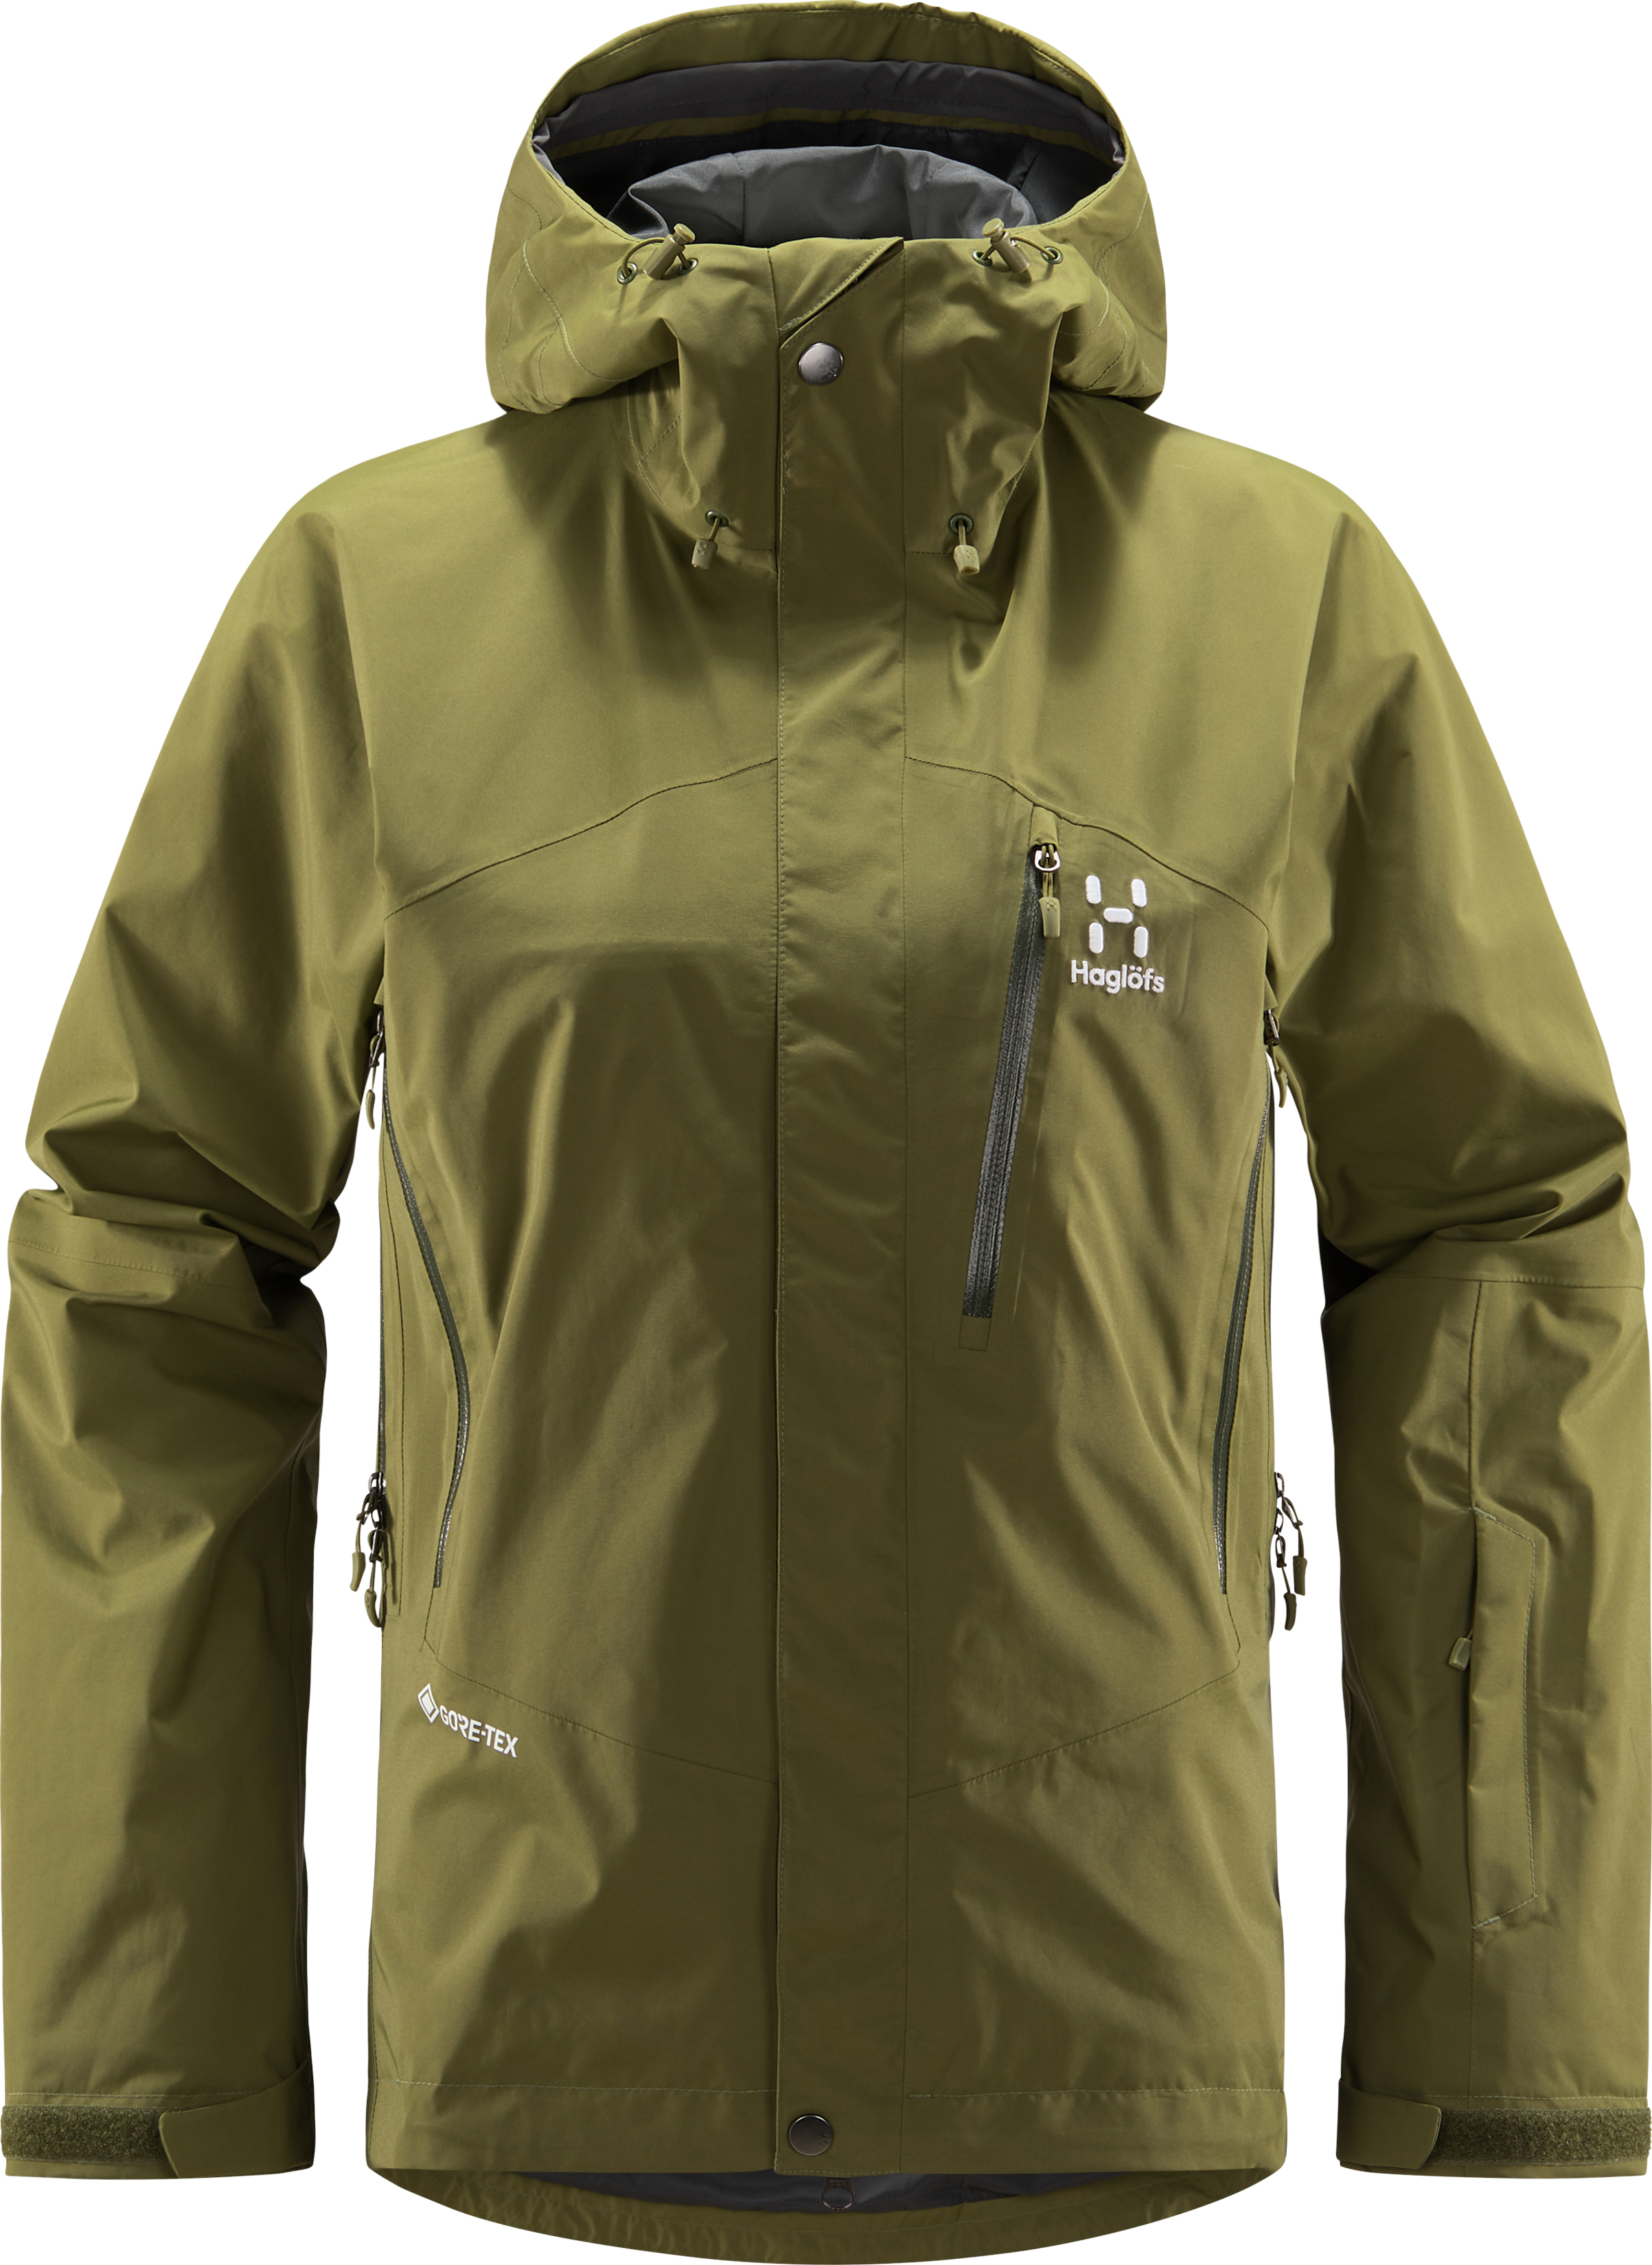 Women’s Astral GORE-TEX Jacket Olive Green